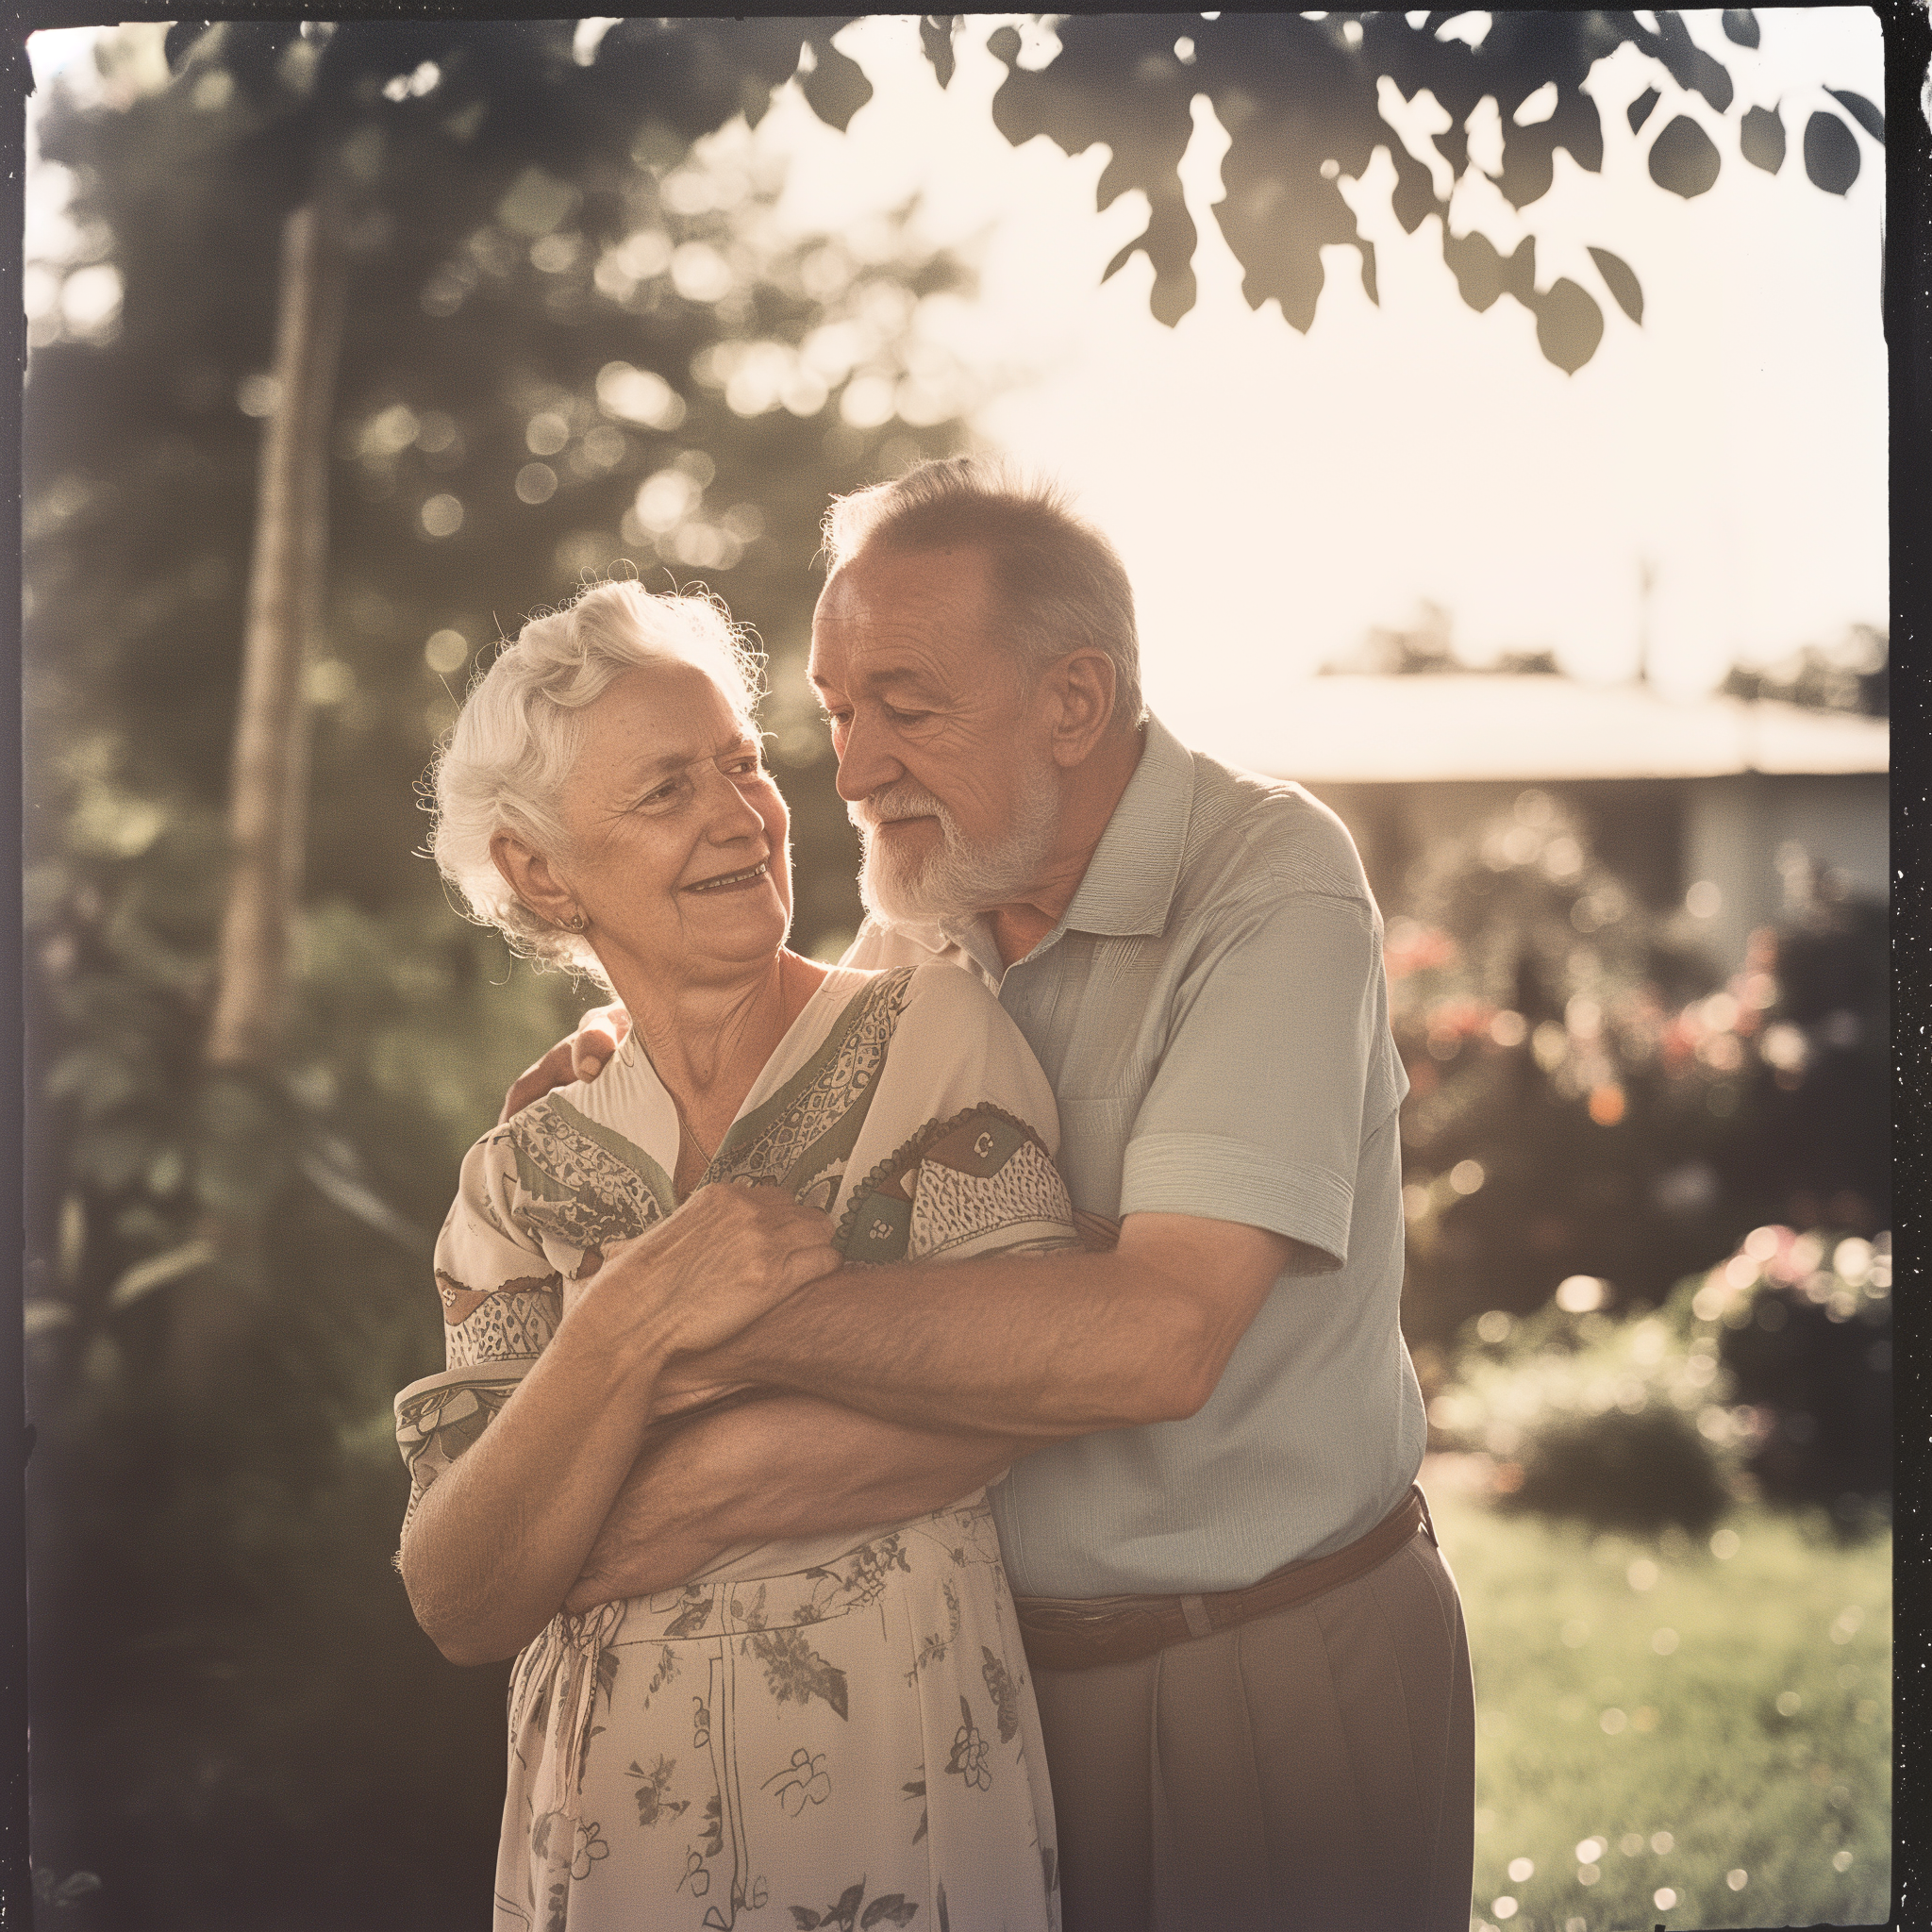 A loving elderly couple hugging outdoors | Source: Midjourney